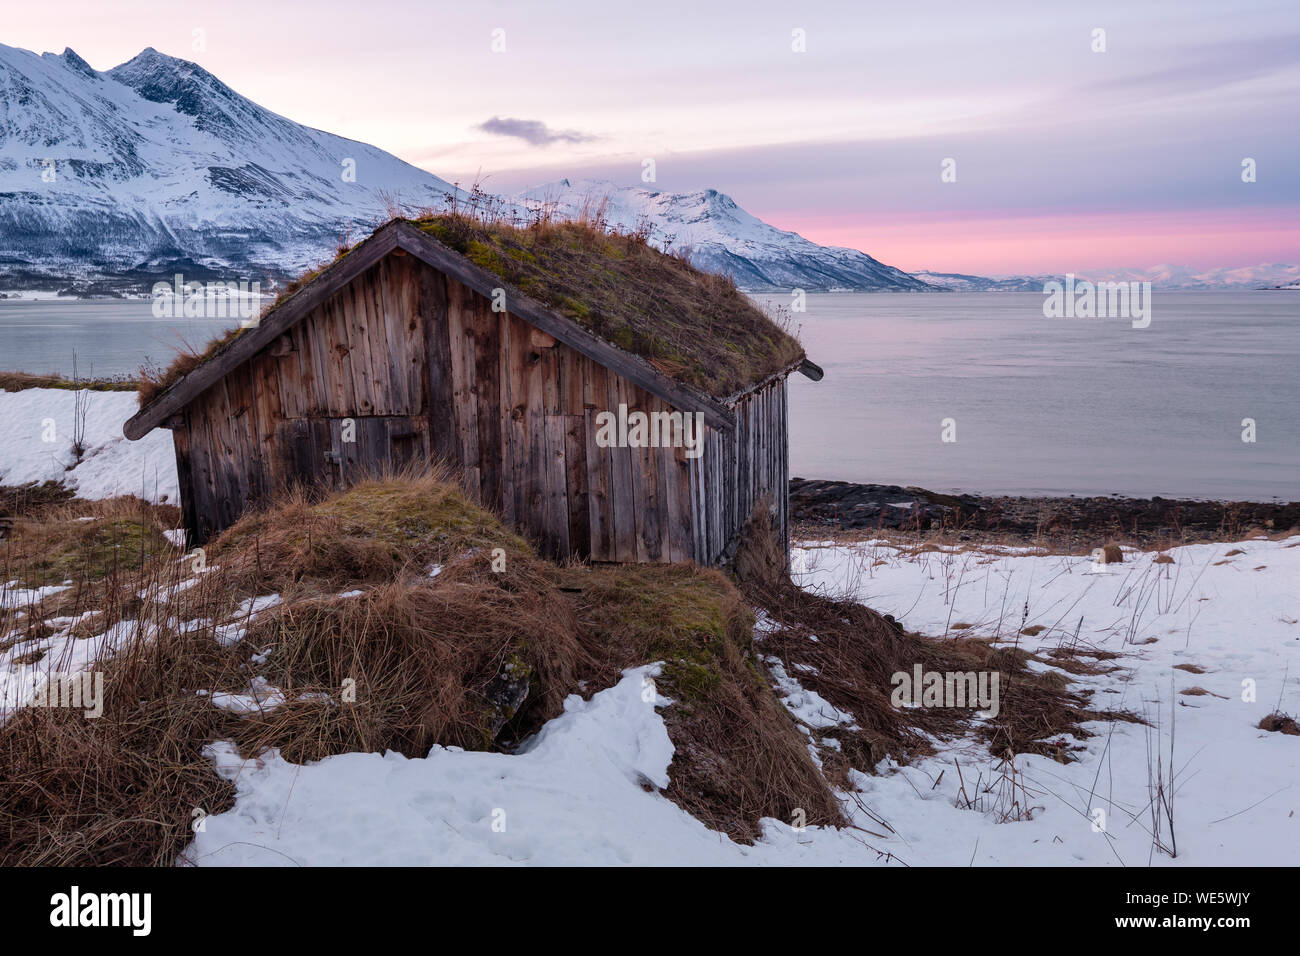 Artic landscape in a fjord with old hut under pink sky at sunset, Tromsö, Norway Stock Photo